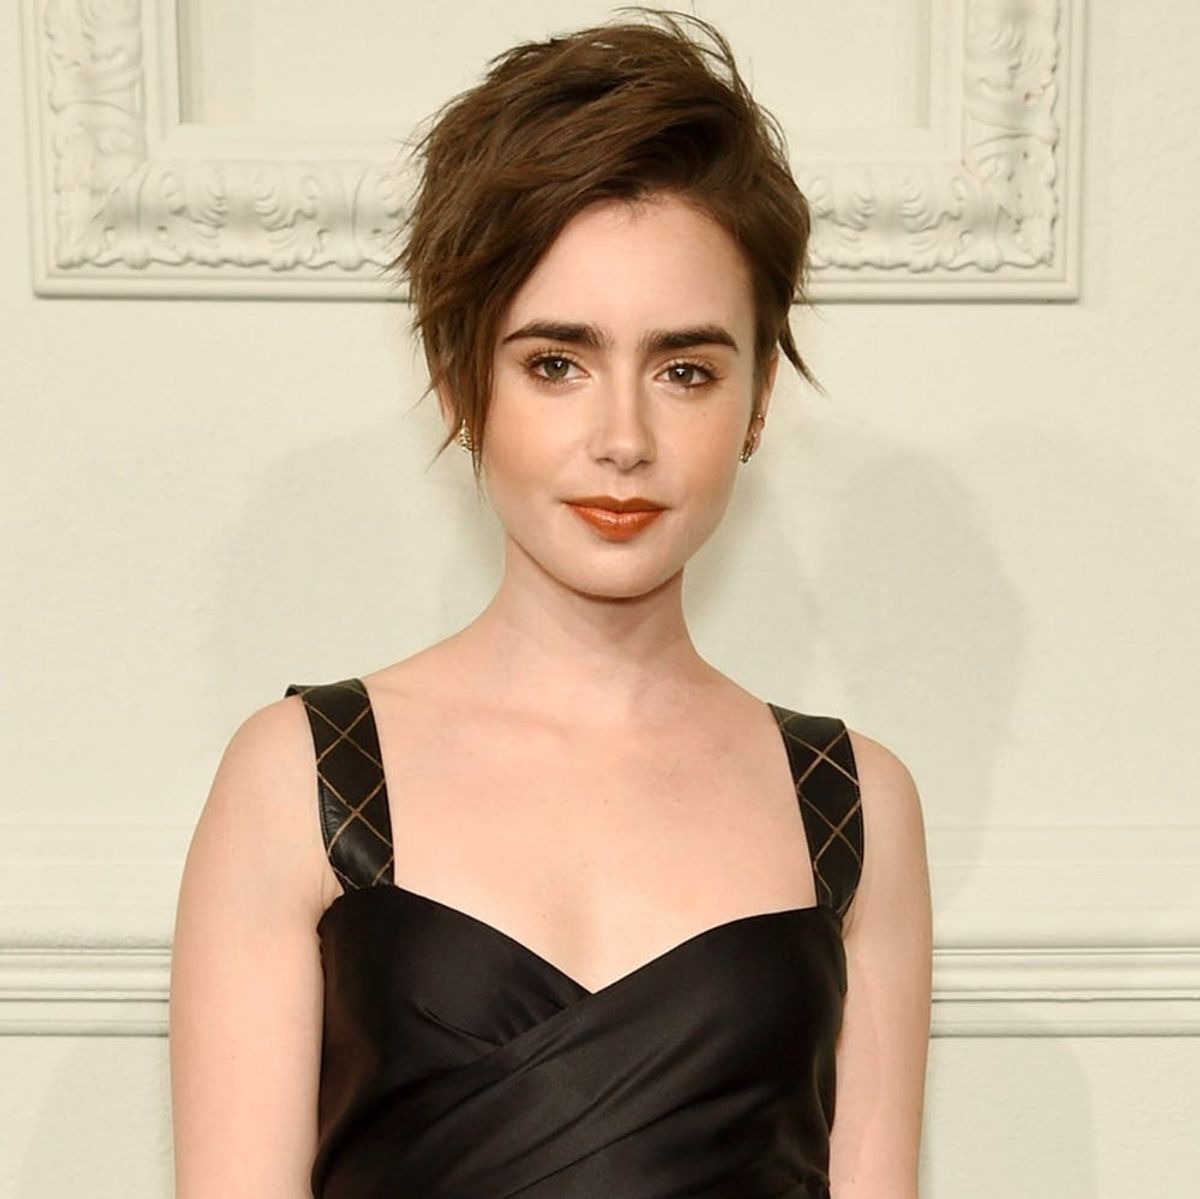 Lily Collins’ New Haircut Is the Perfect Summer ‘Do